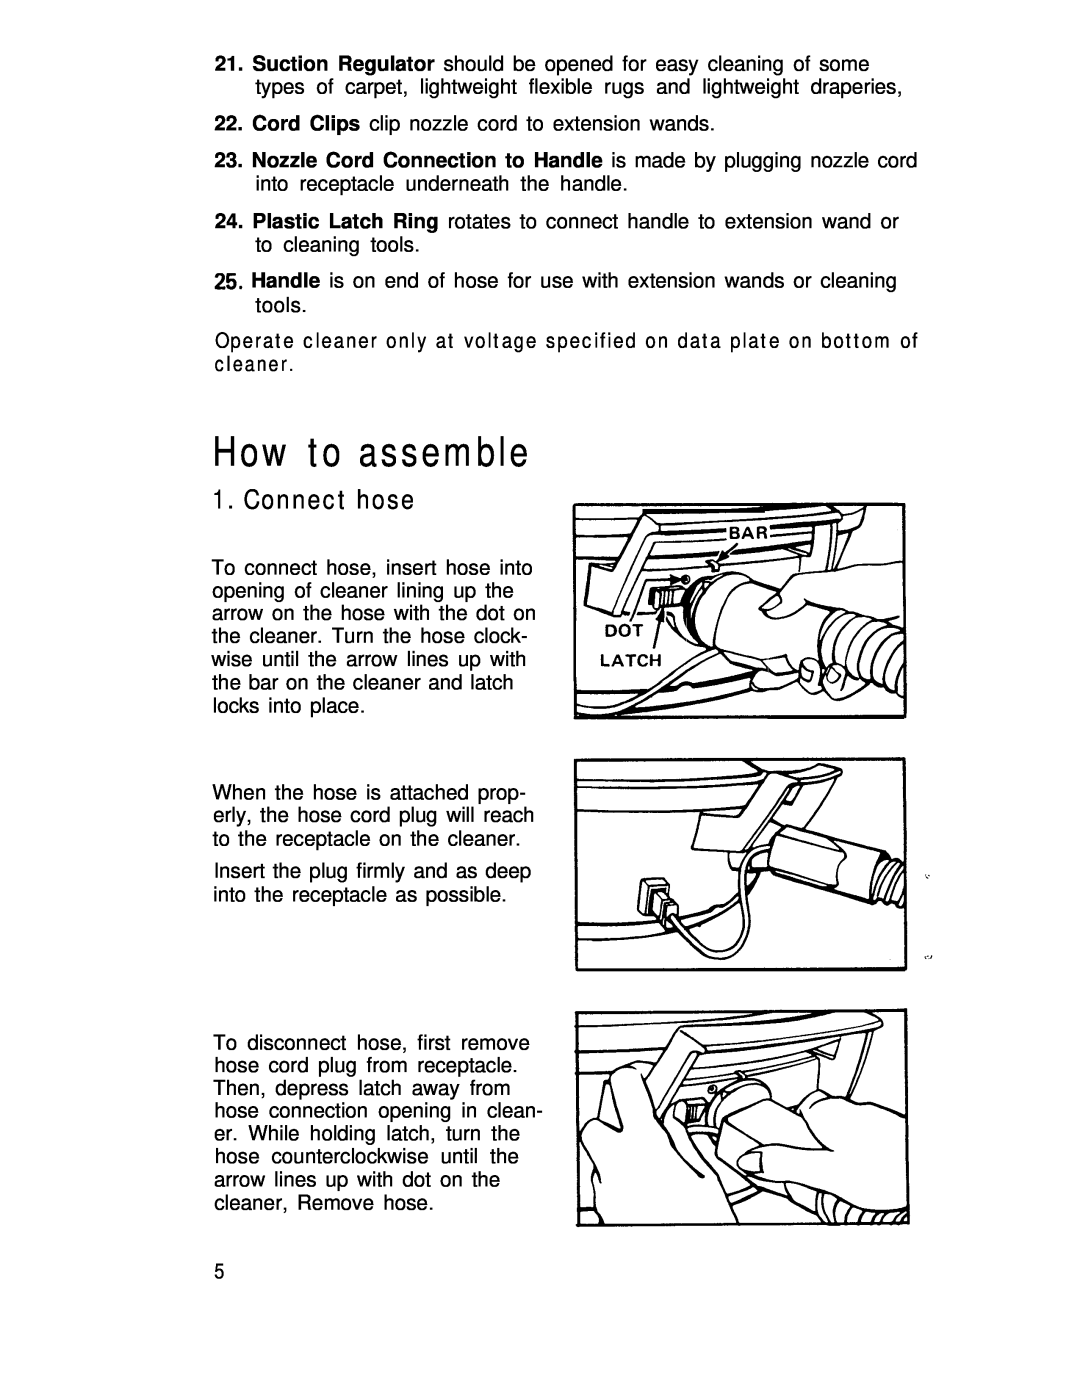 Hoover S3239, S3237 manual How to assemble, Connect hose 